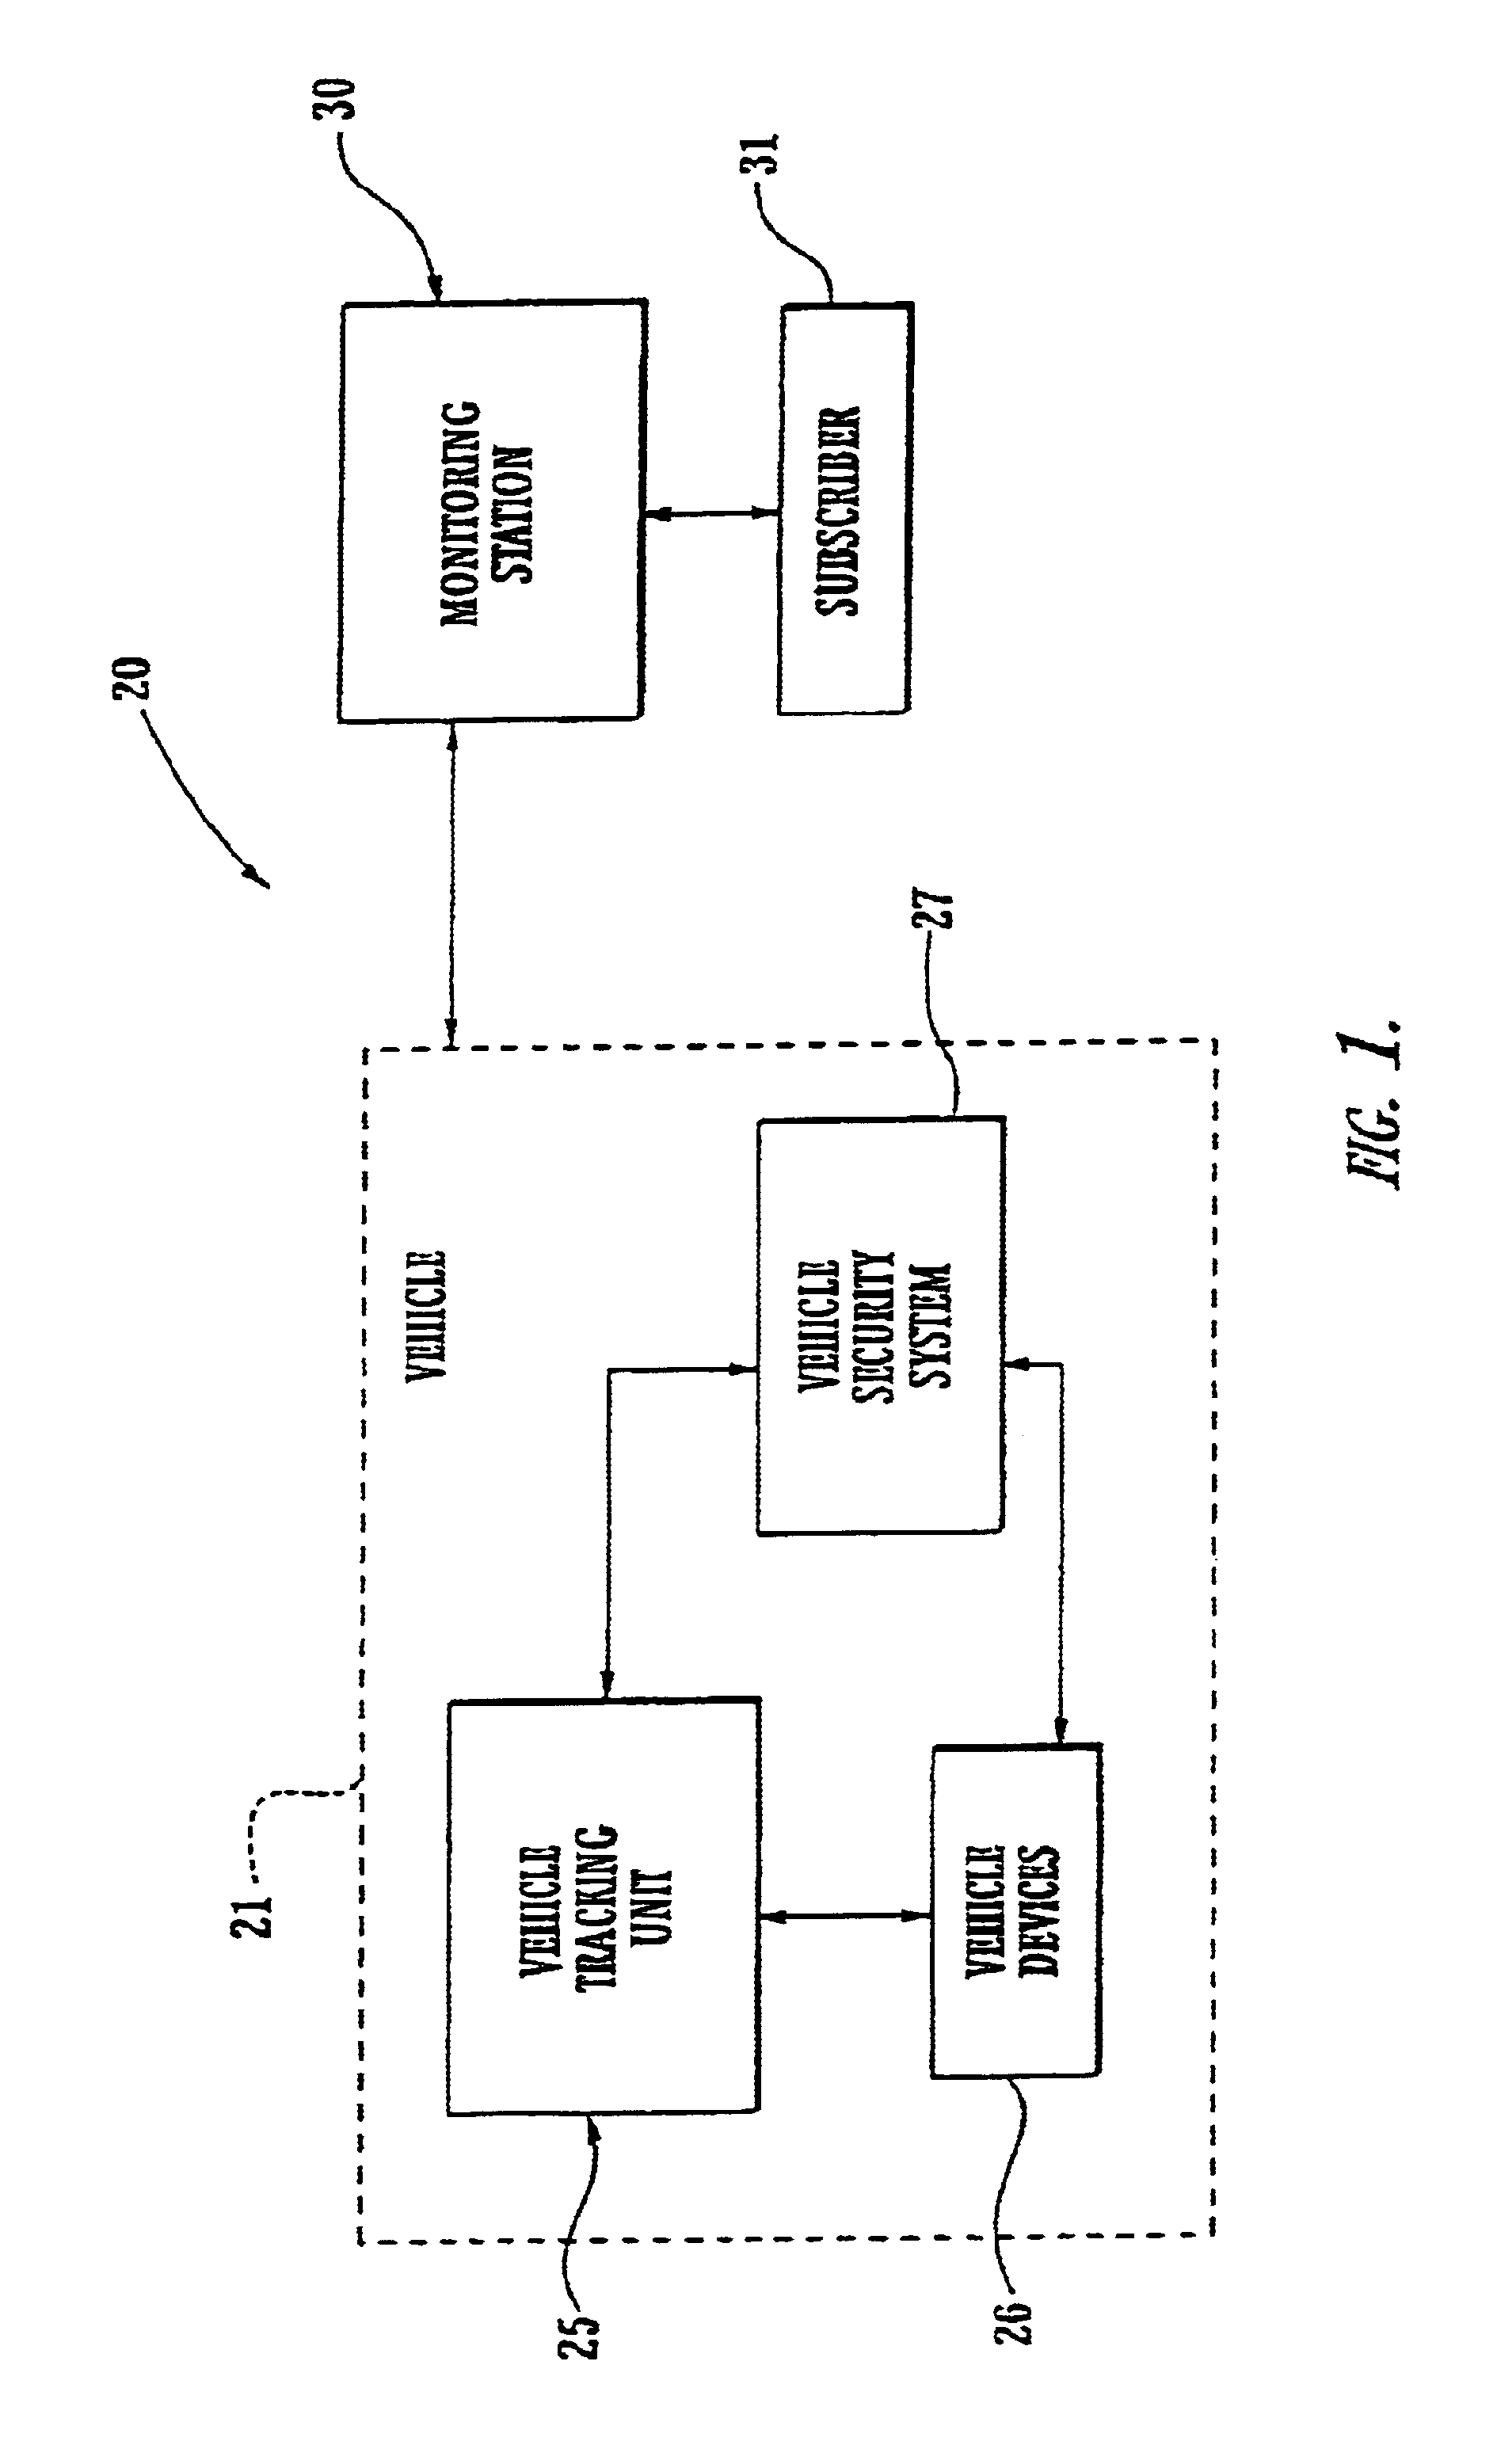 Vehicle tracker including a connector for an upgrade device and related methods